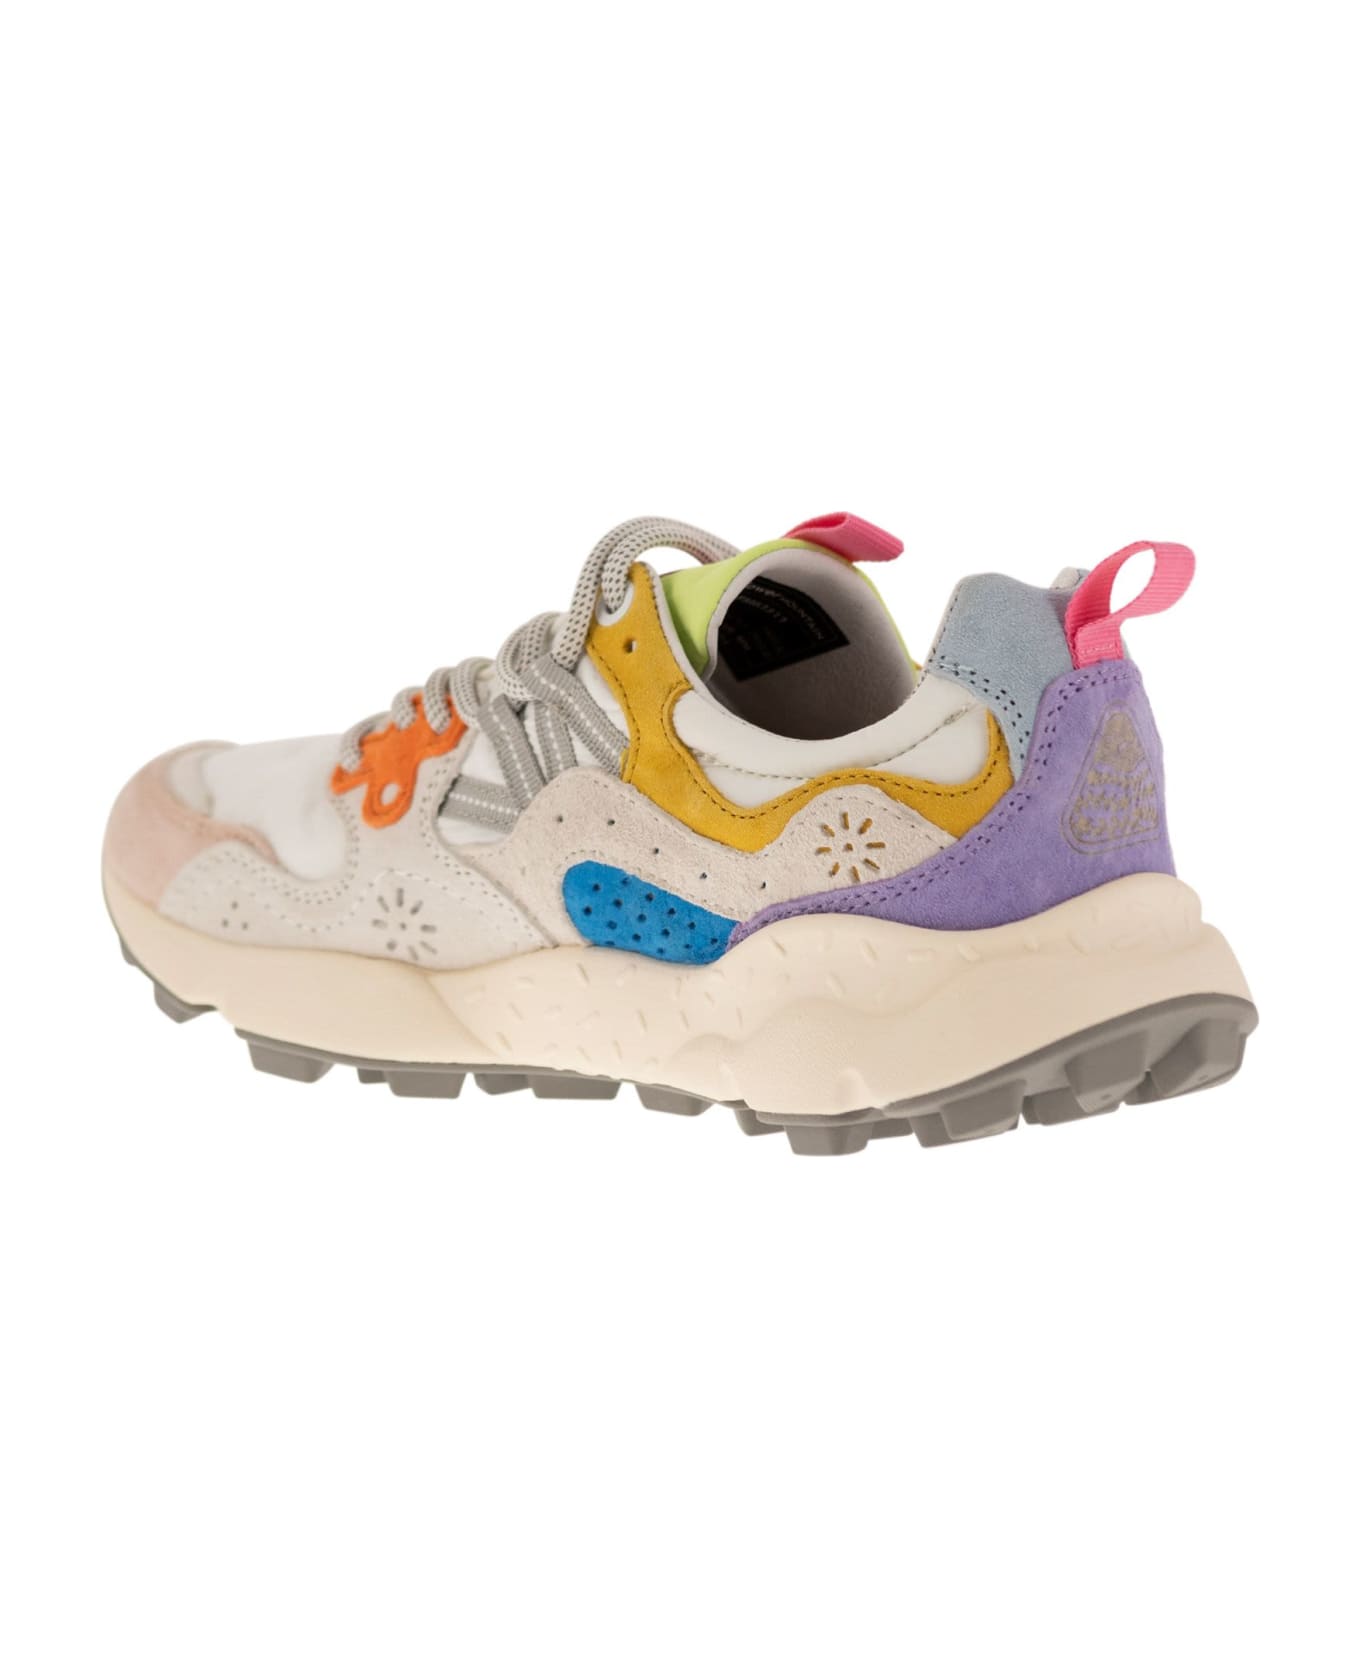 Flower Mountain Yamano 3 - Sneakers In Suede And Technical Fabric - White/pink